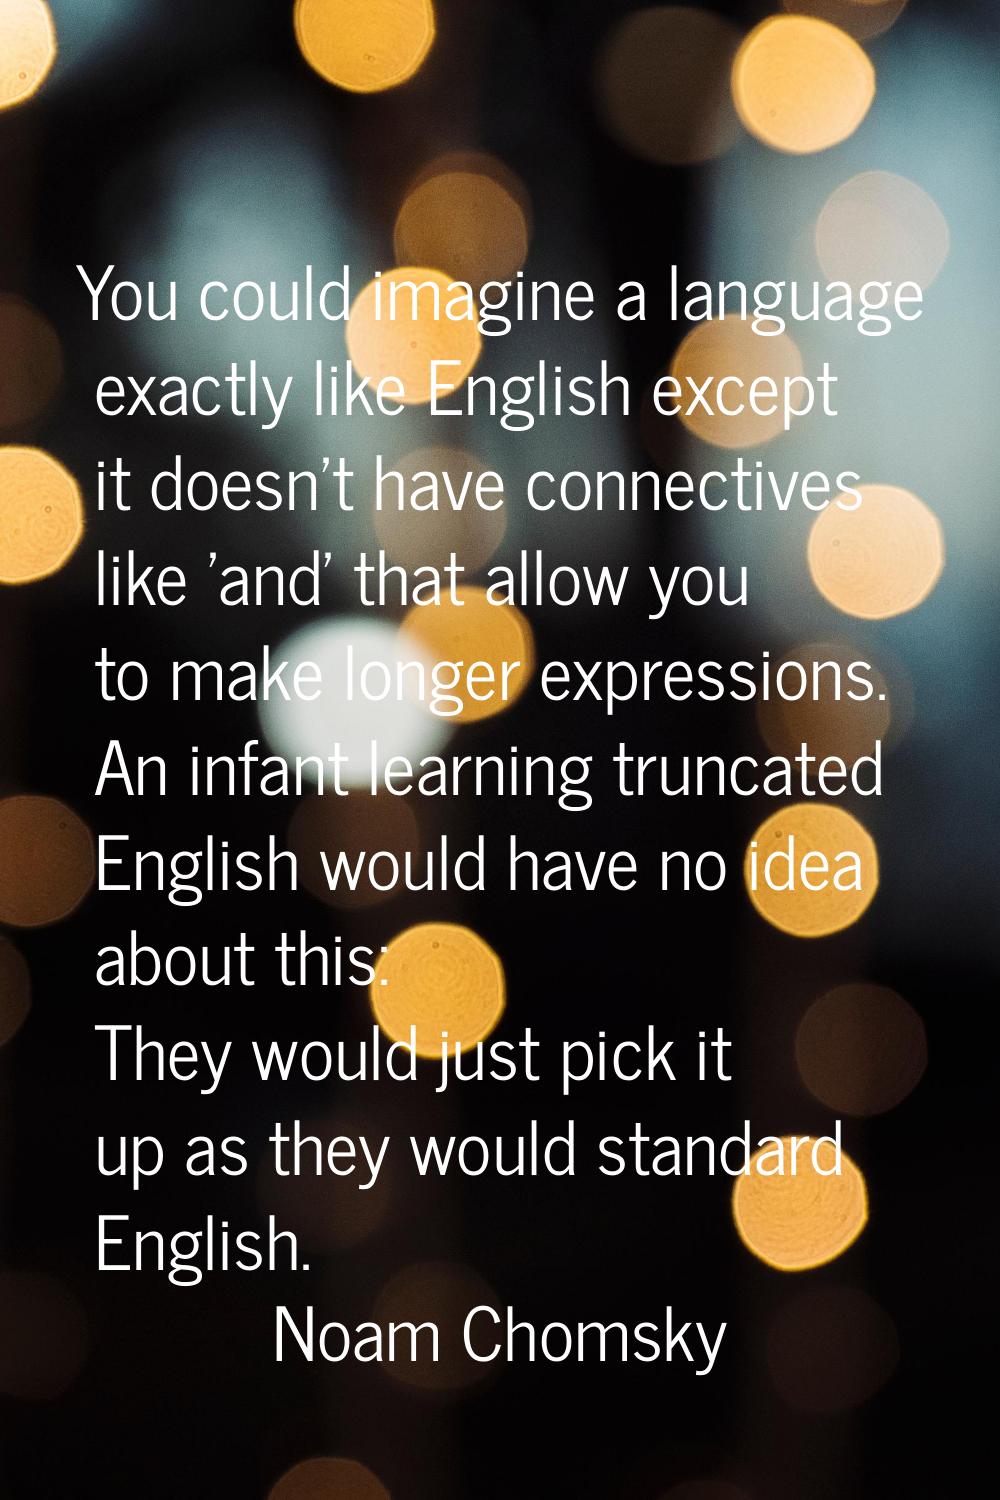 You could imagine a language exactly like English except it doesn't have connectives like 'and' tha